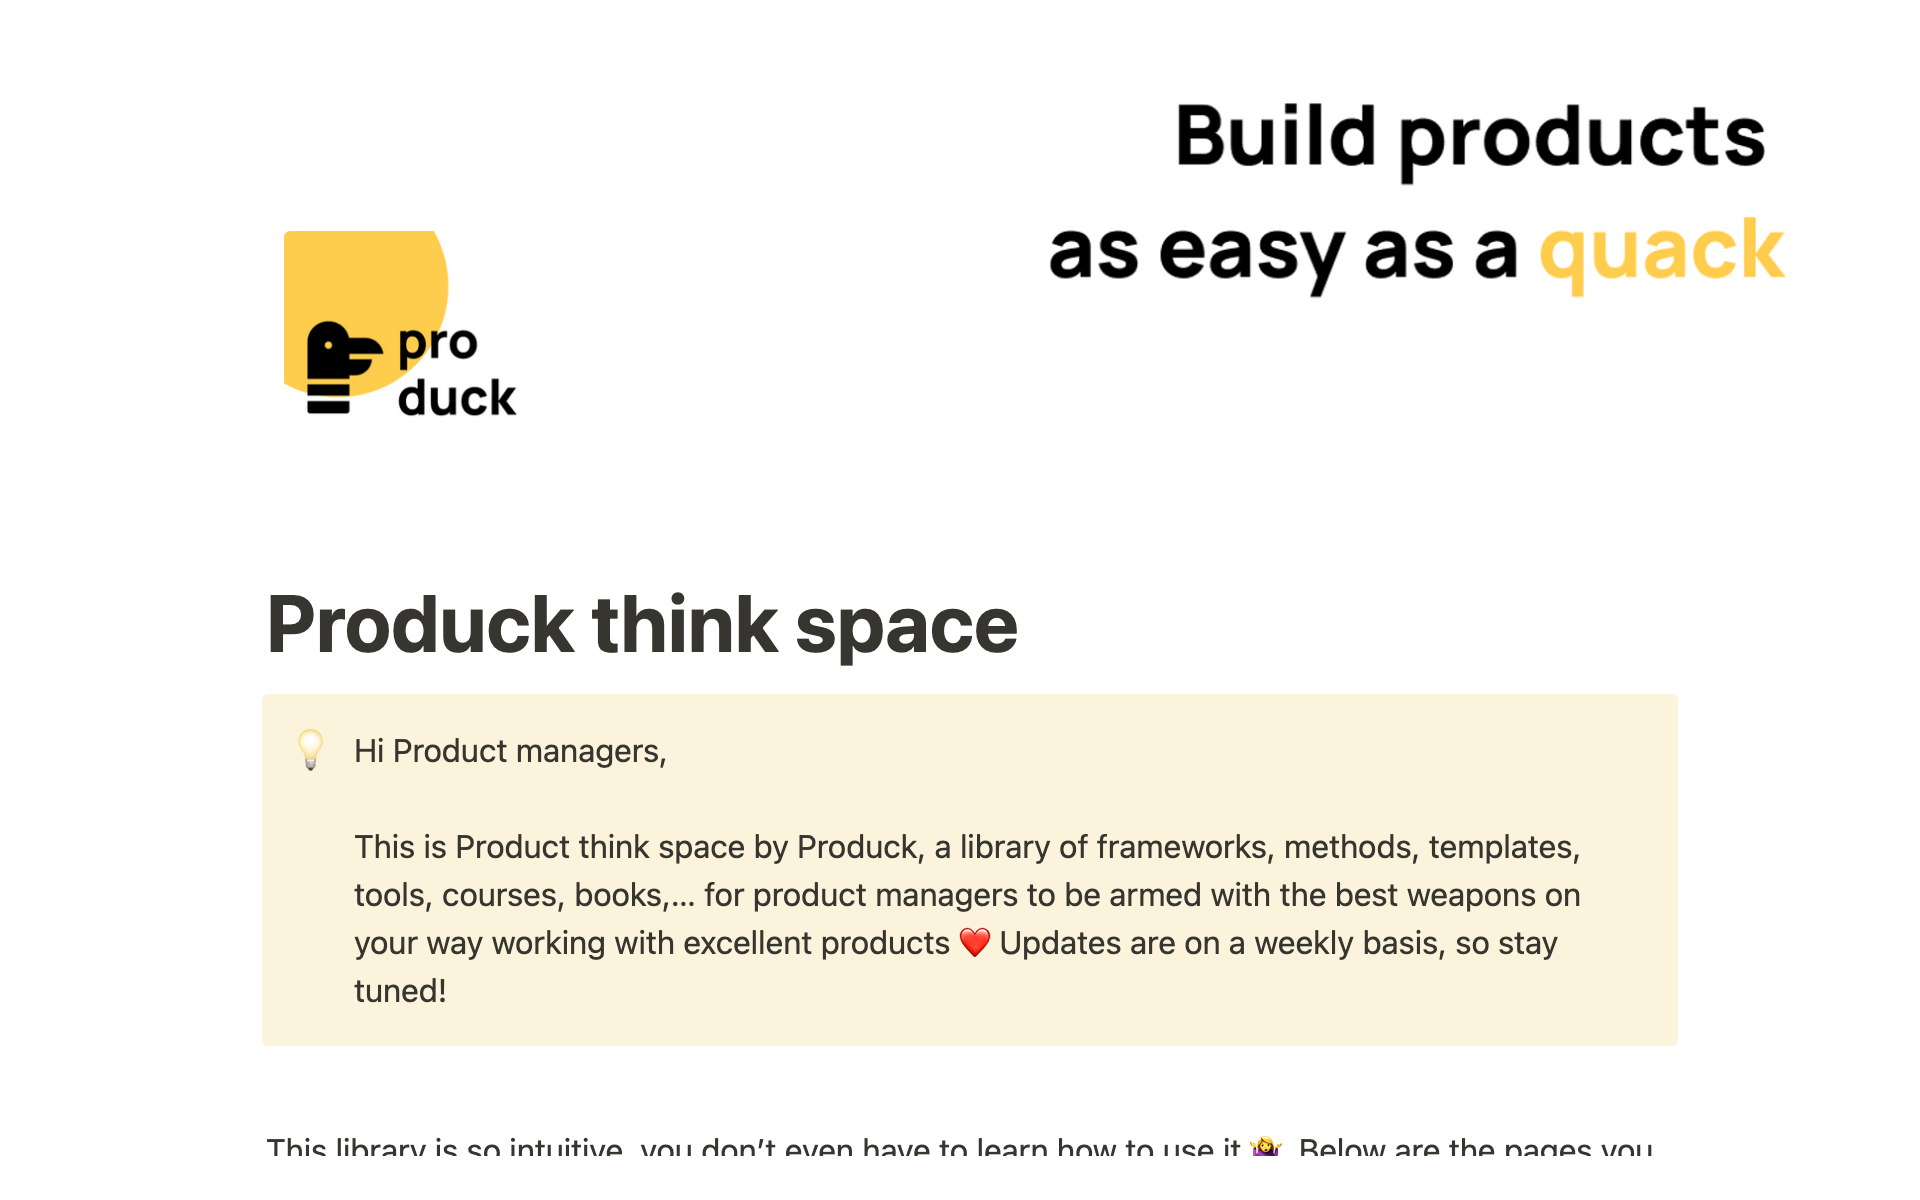 Use this Product think space to find shortcuts for your thinking, and focus on executing what matters for your product!